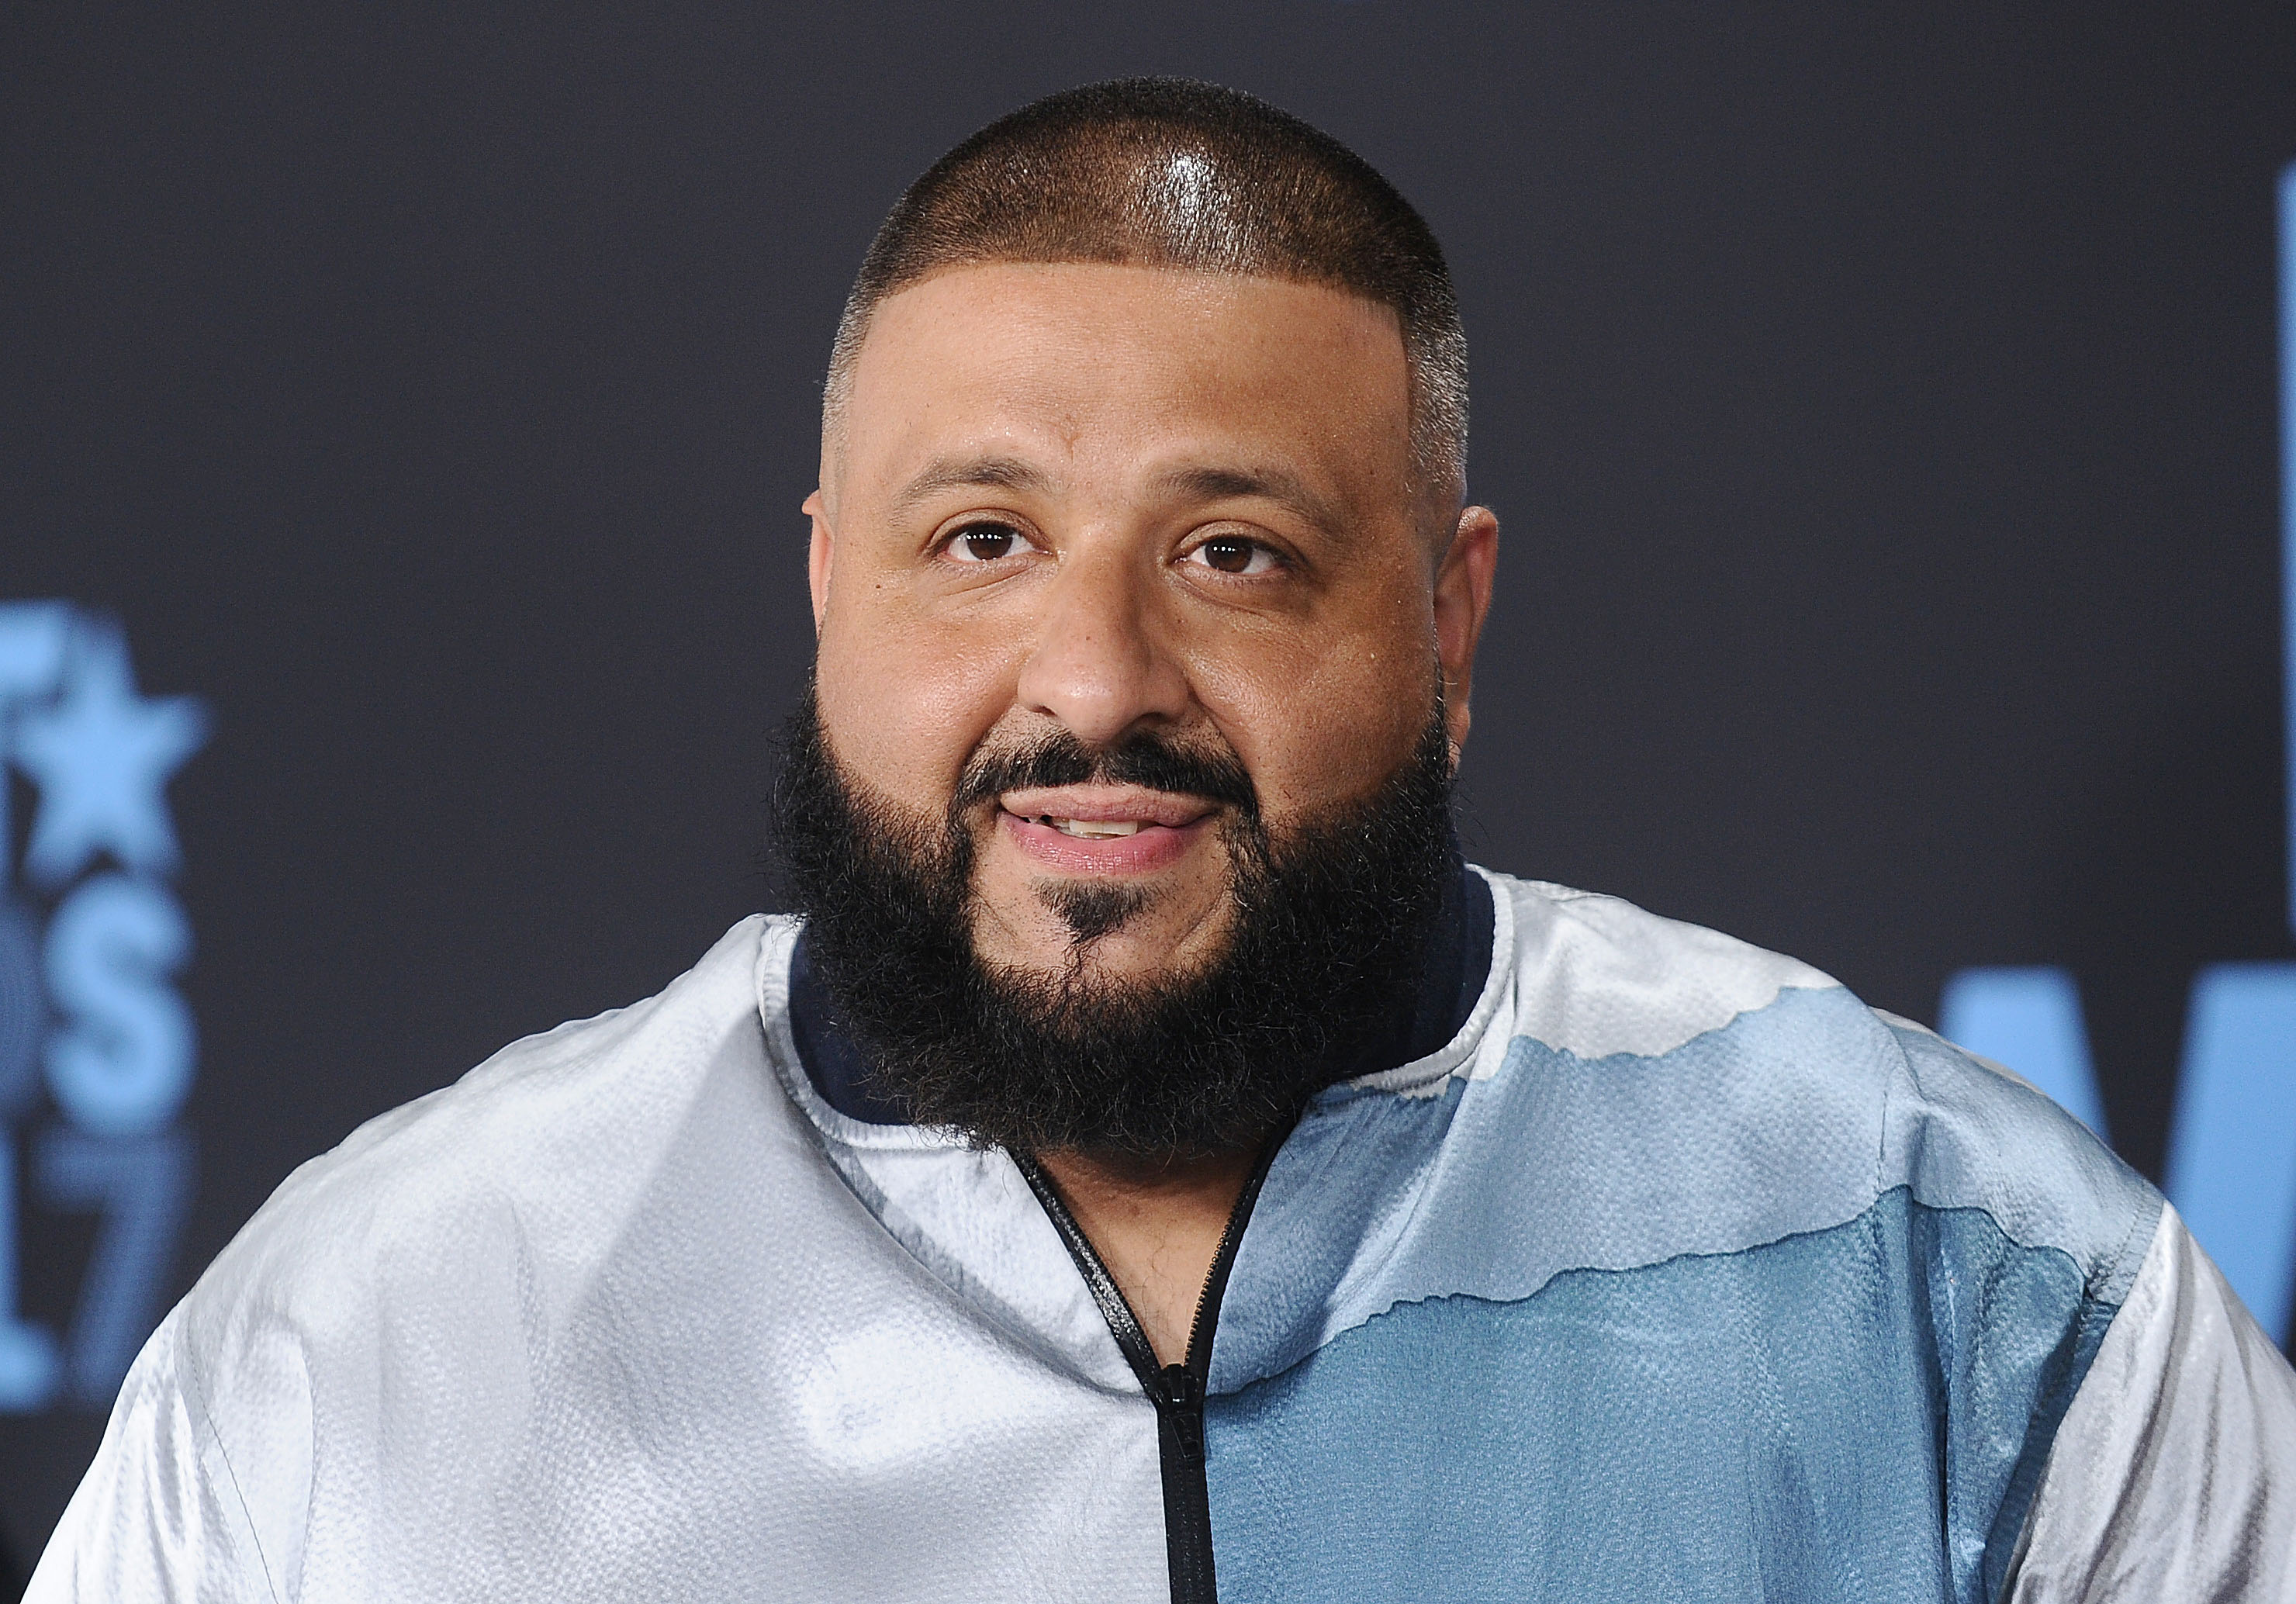 DJ Khaled at the 2017 BET Awards at Microsoft Theater on June 25, 2017 in Los Angeles, California.|Source: Getty Images